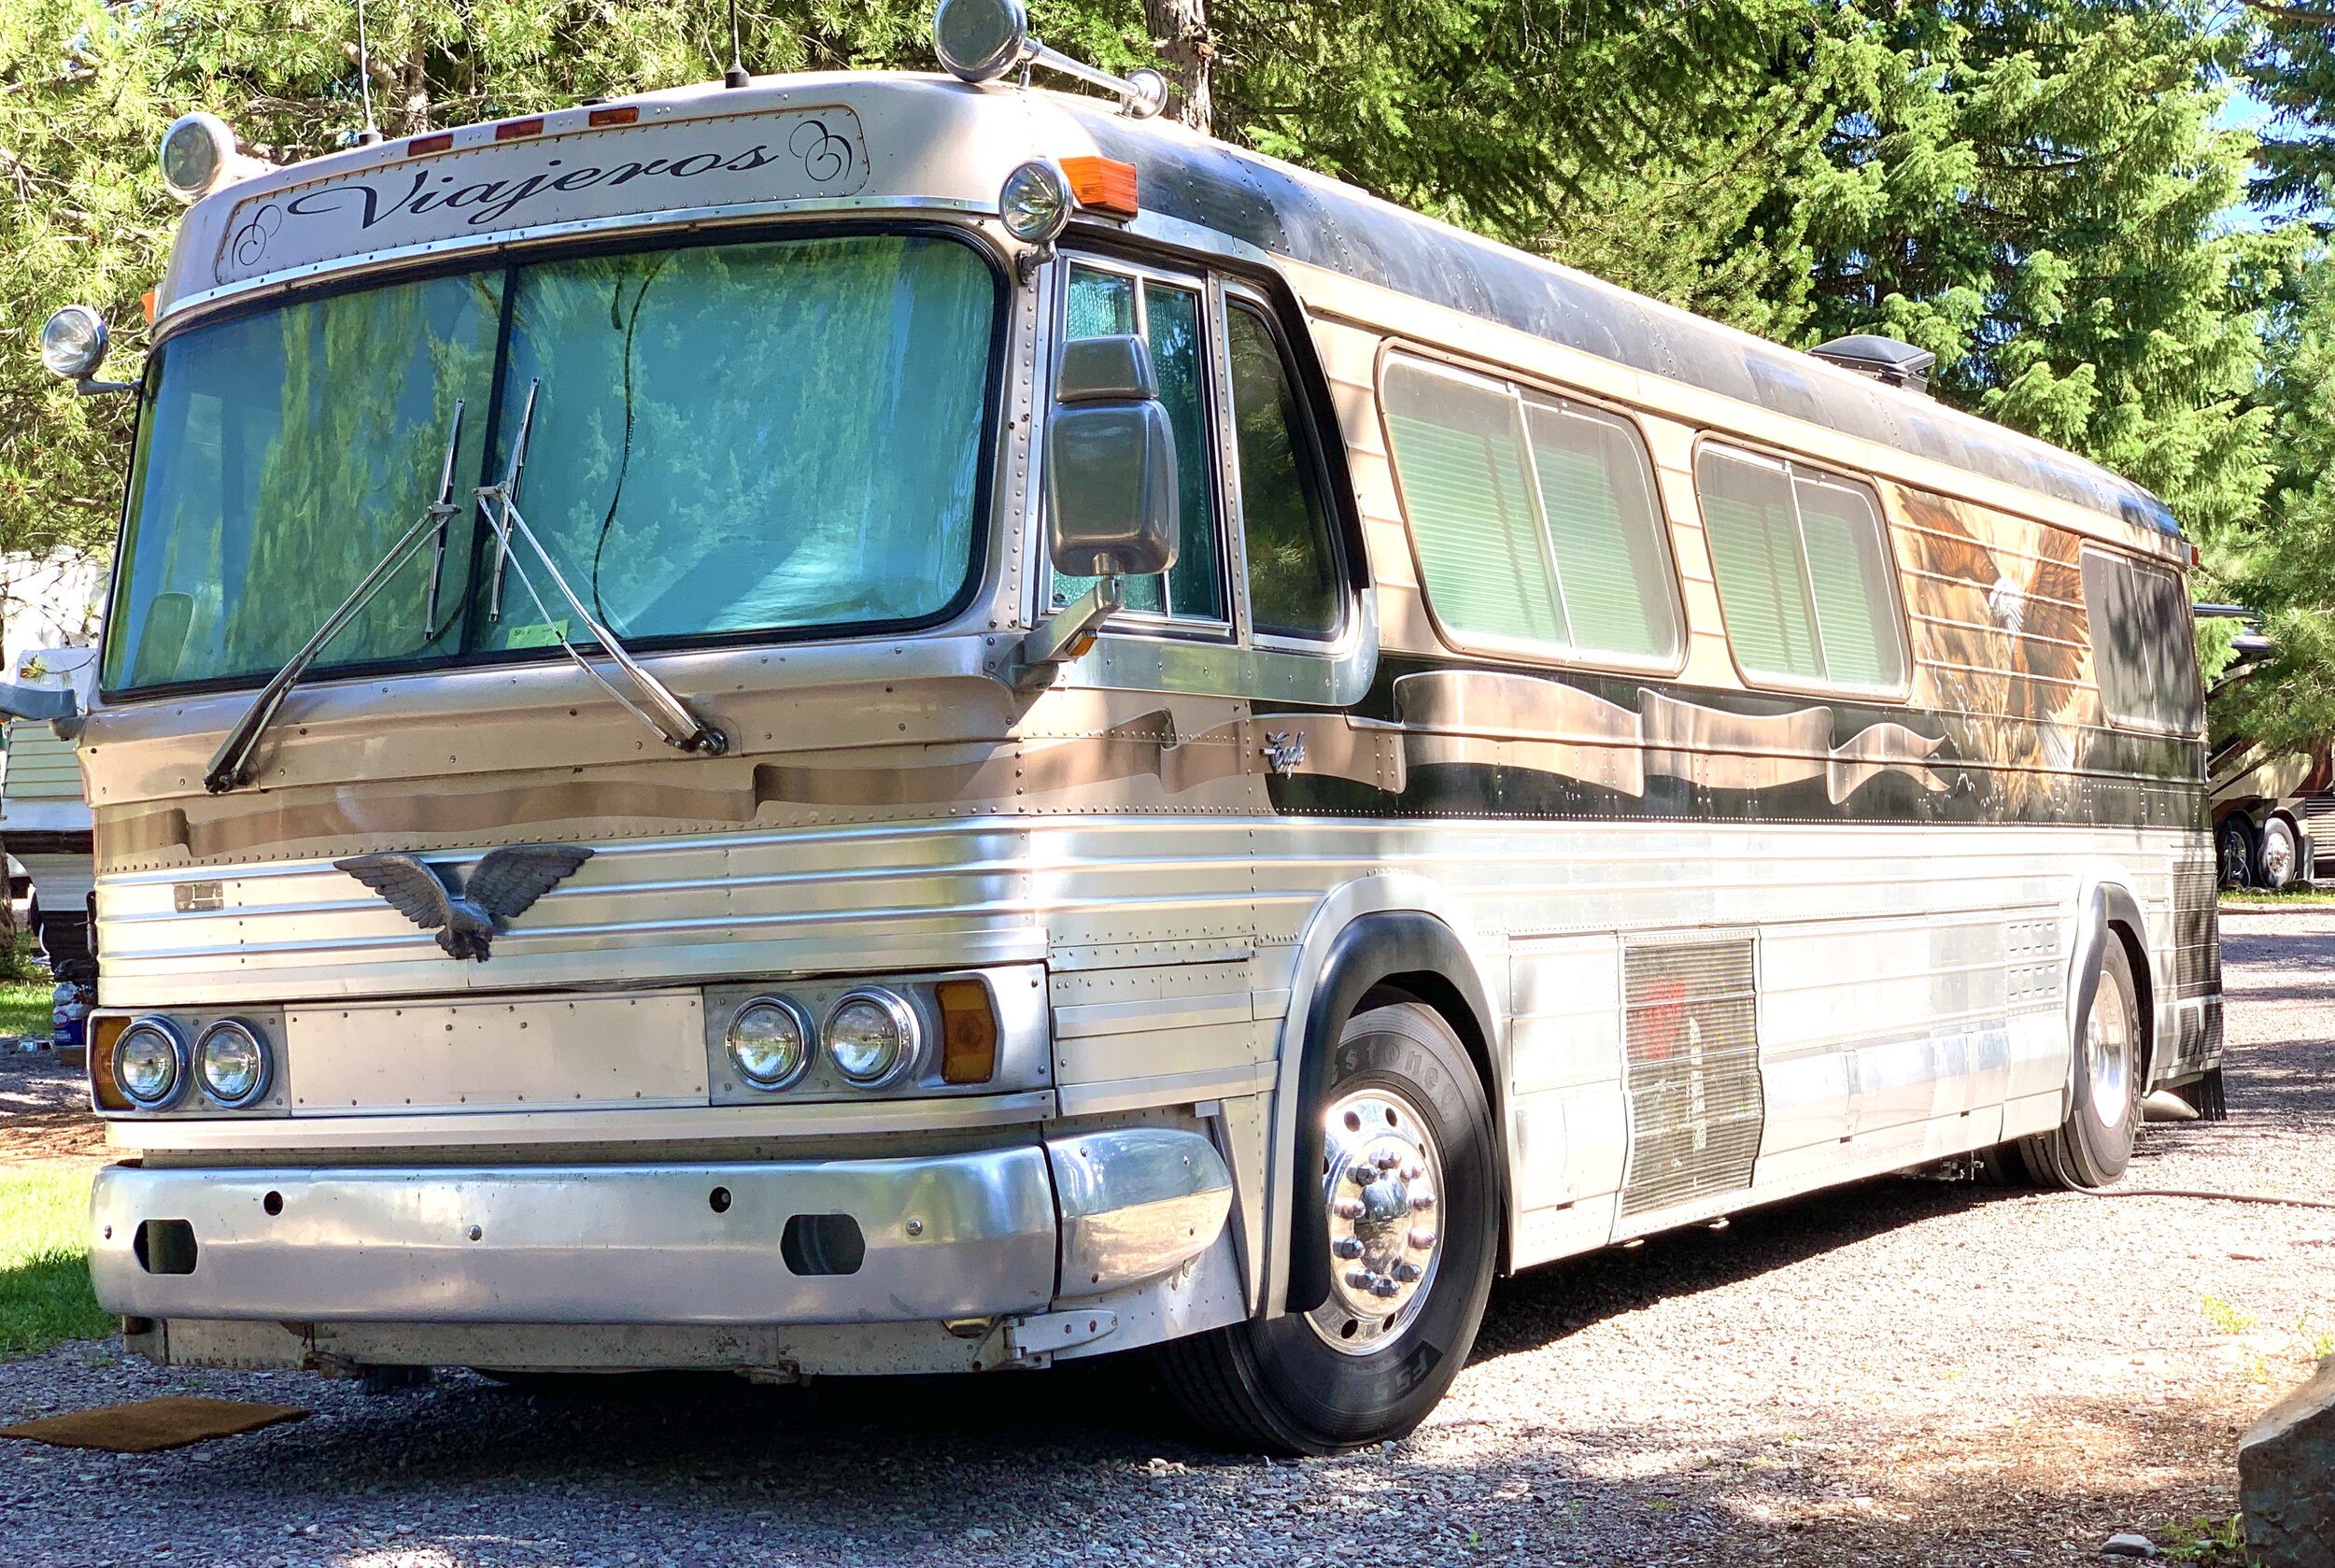  If you’re not regularly traveling around in an RV, you may not be privy to some of the RV culture. While there are many who enjoy a life of luxury on the road in $350,000+ rigs, there are also those that get a bit creative. We thought we’d share a f